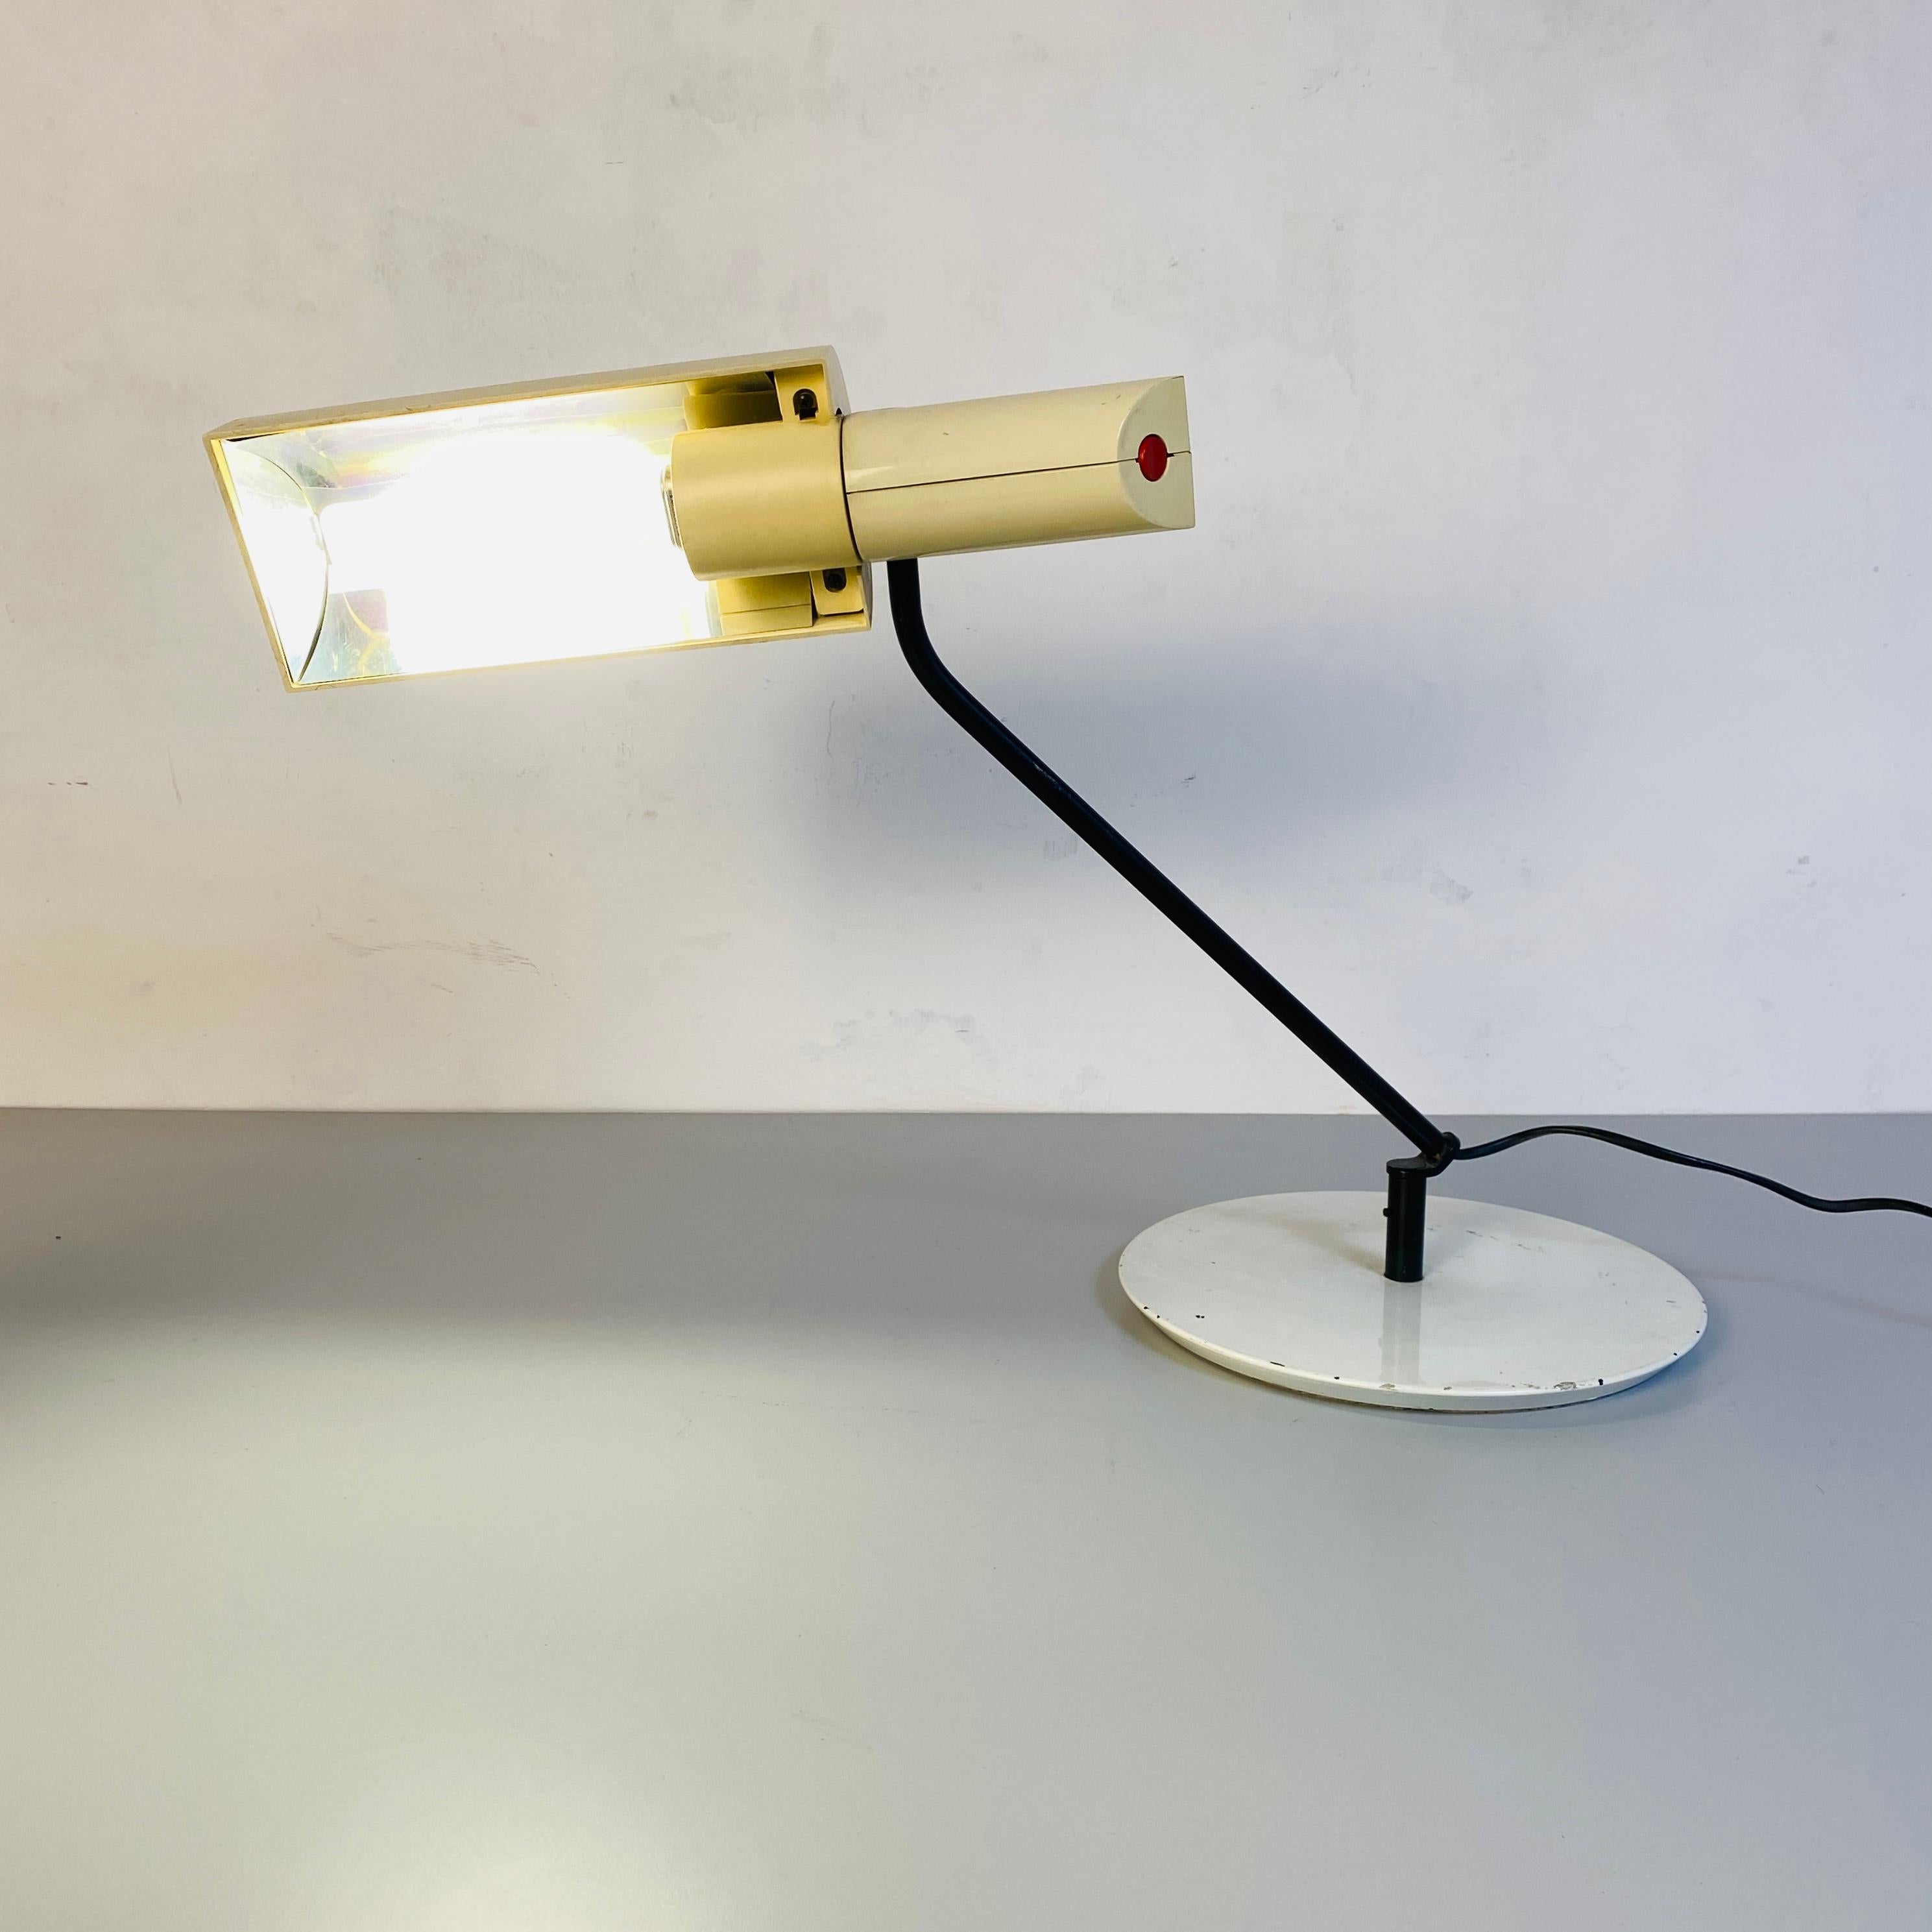 Mid-Century Modern metal and plastic table lamp with irregular structure, 1980s
Metal table lamp with round metal base, irregular metal structure and Directional white plastic lampshade.
Fantastic for a desk with a perfect vintage style, this lamp